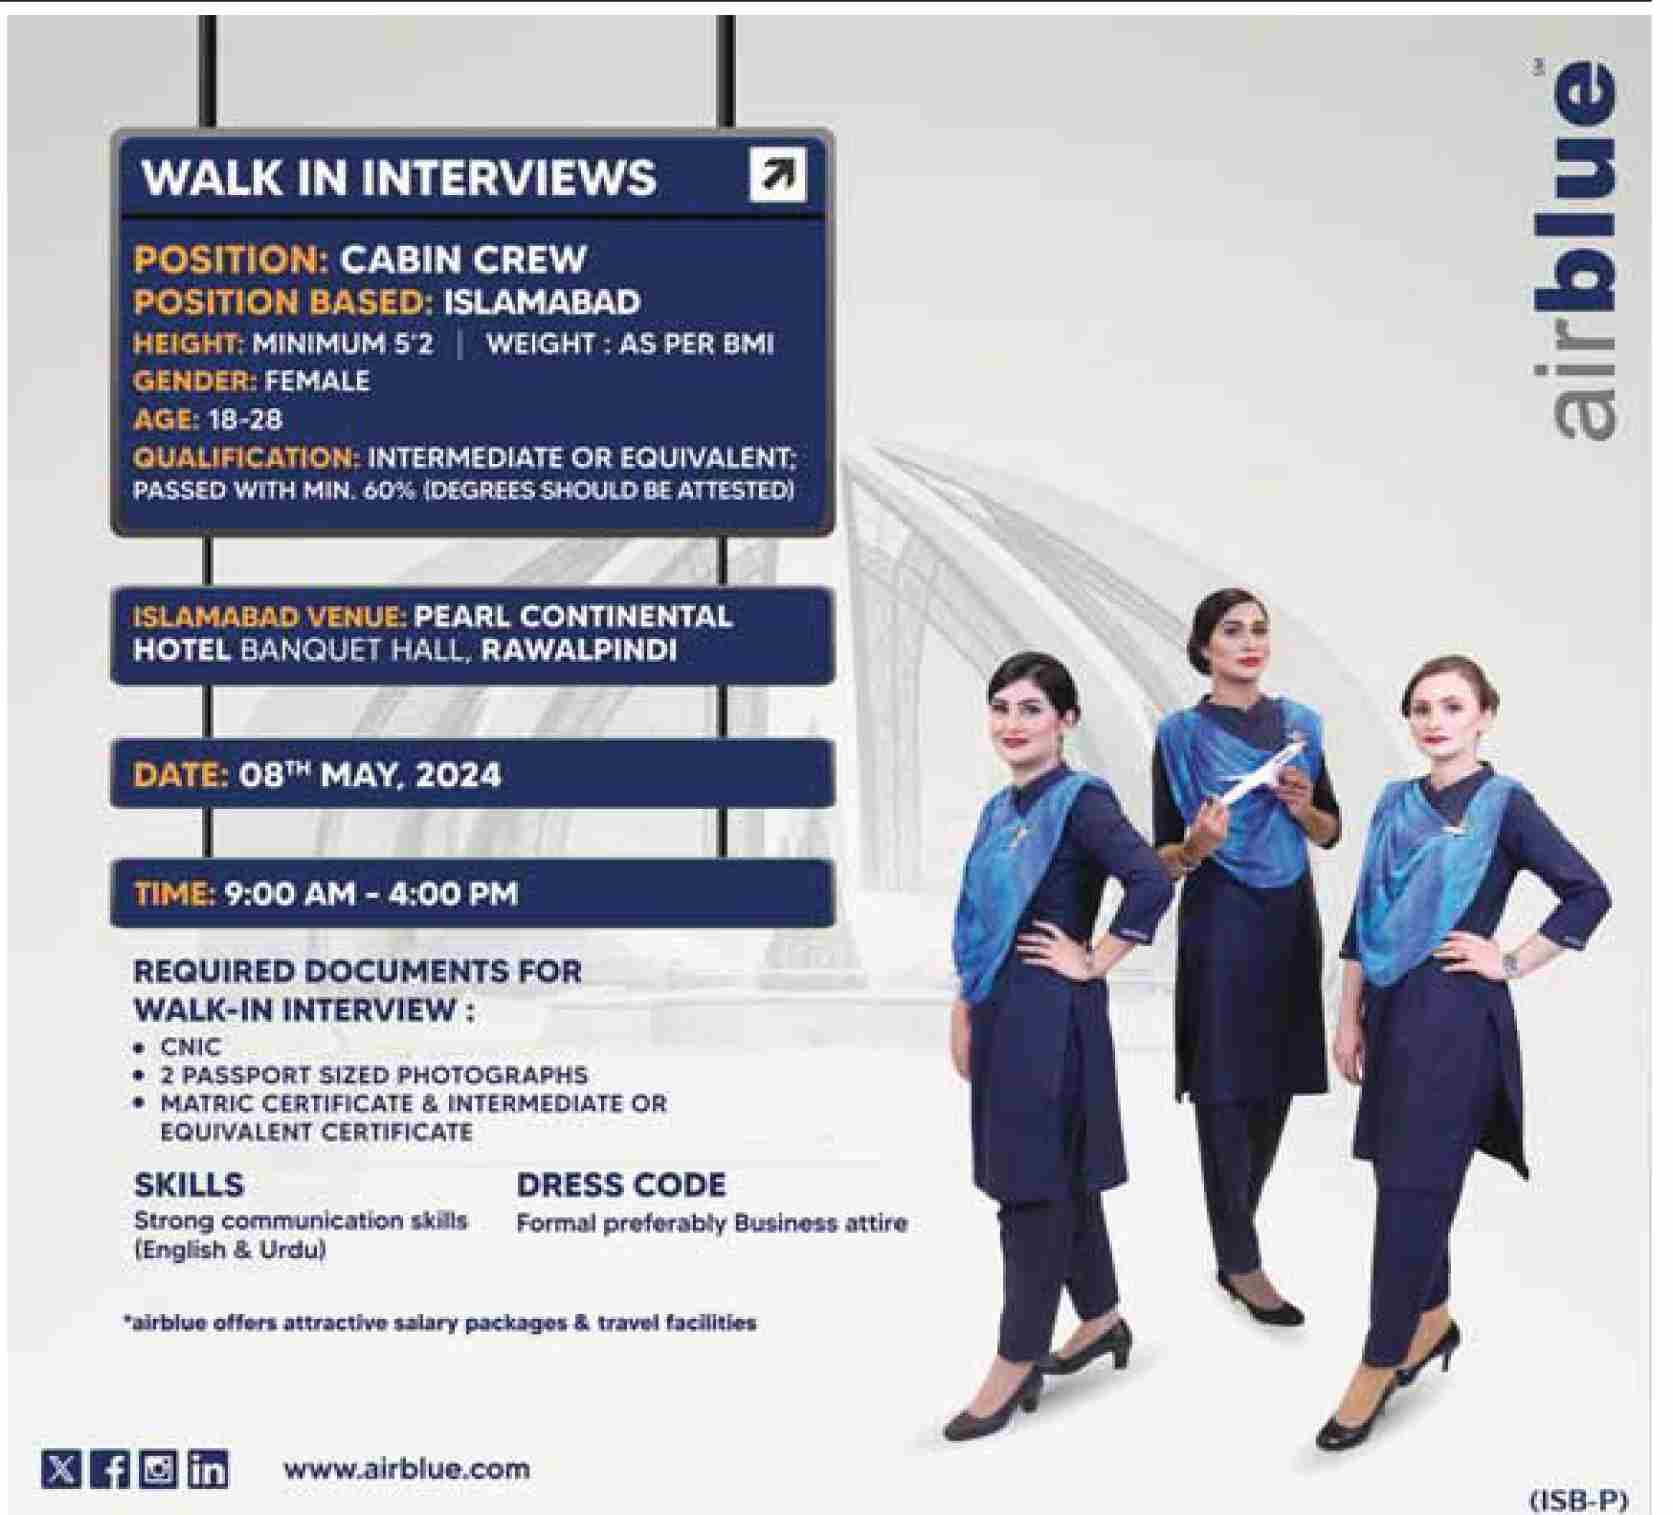 Airhostess Jobs in Air Blue May 2024 Female Cabin Crew Walk in Interviews Latest